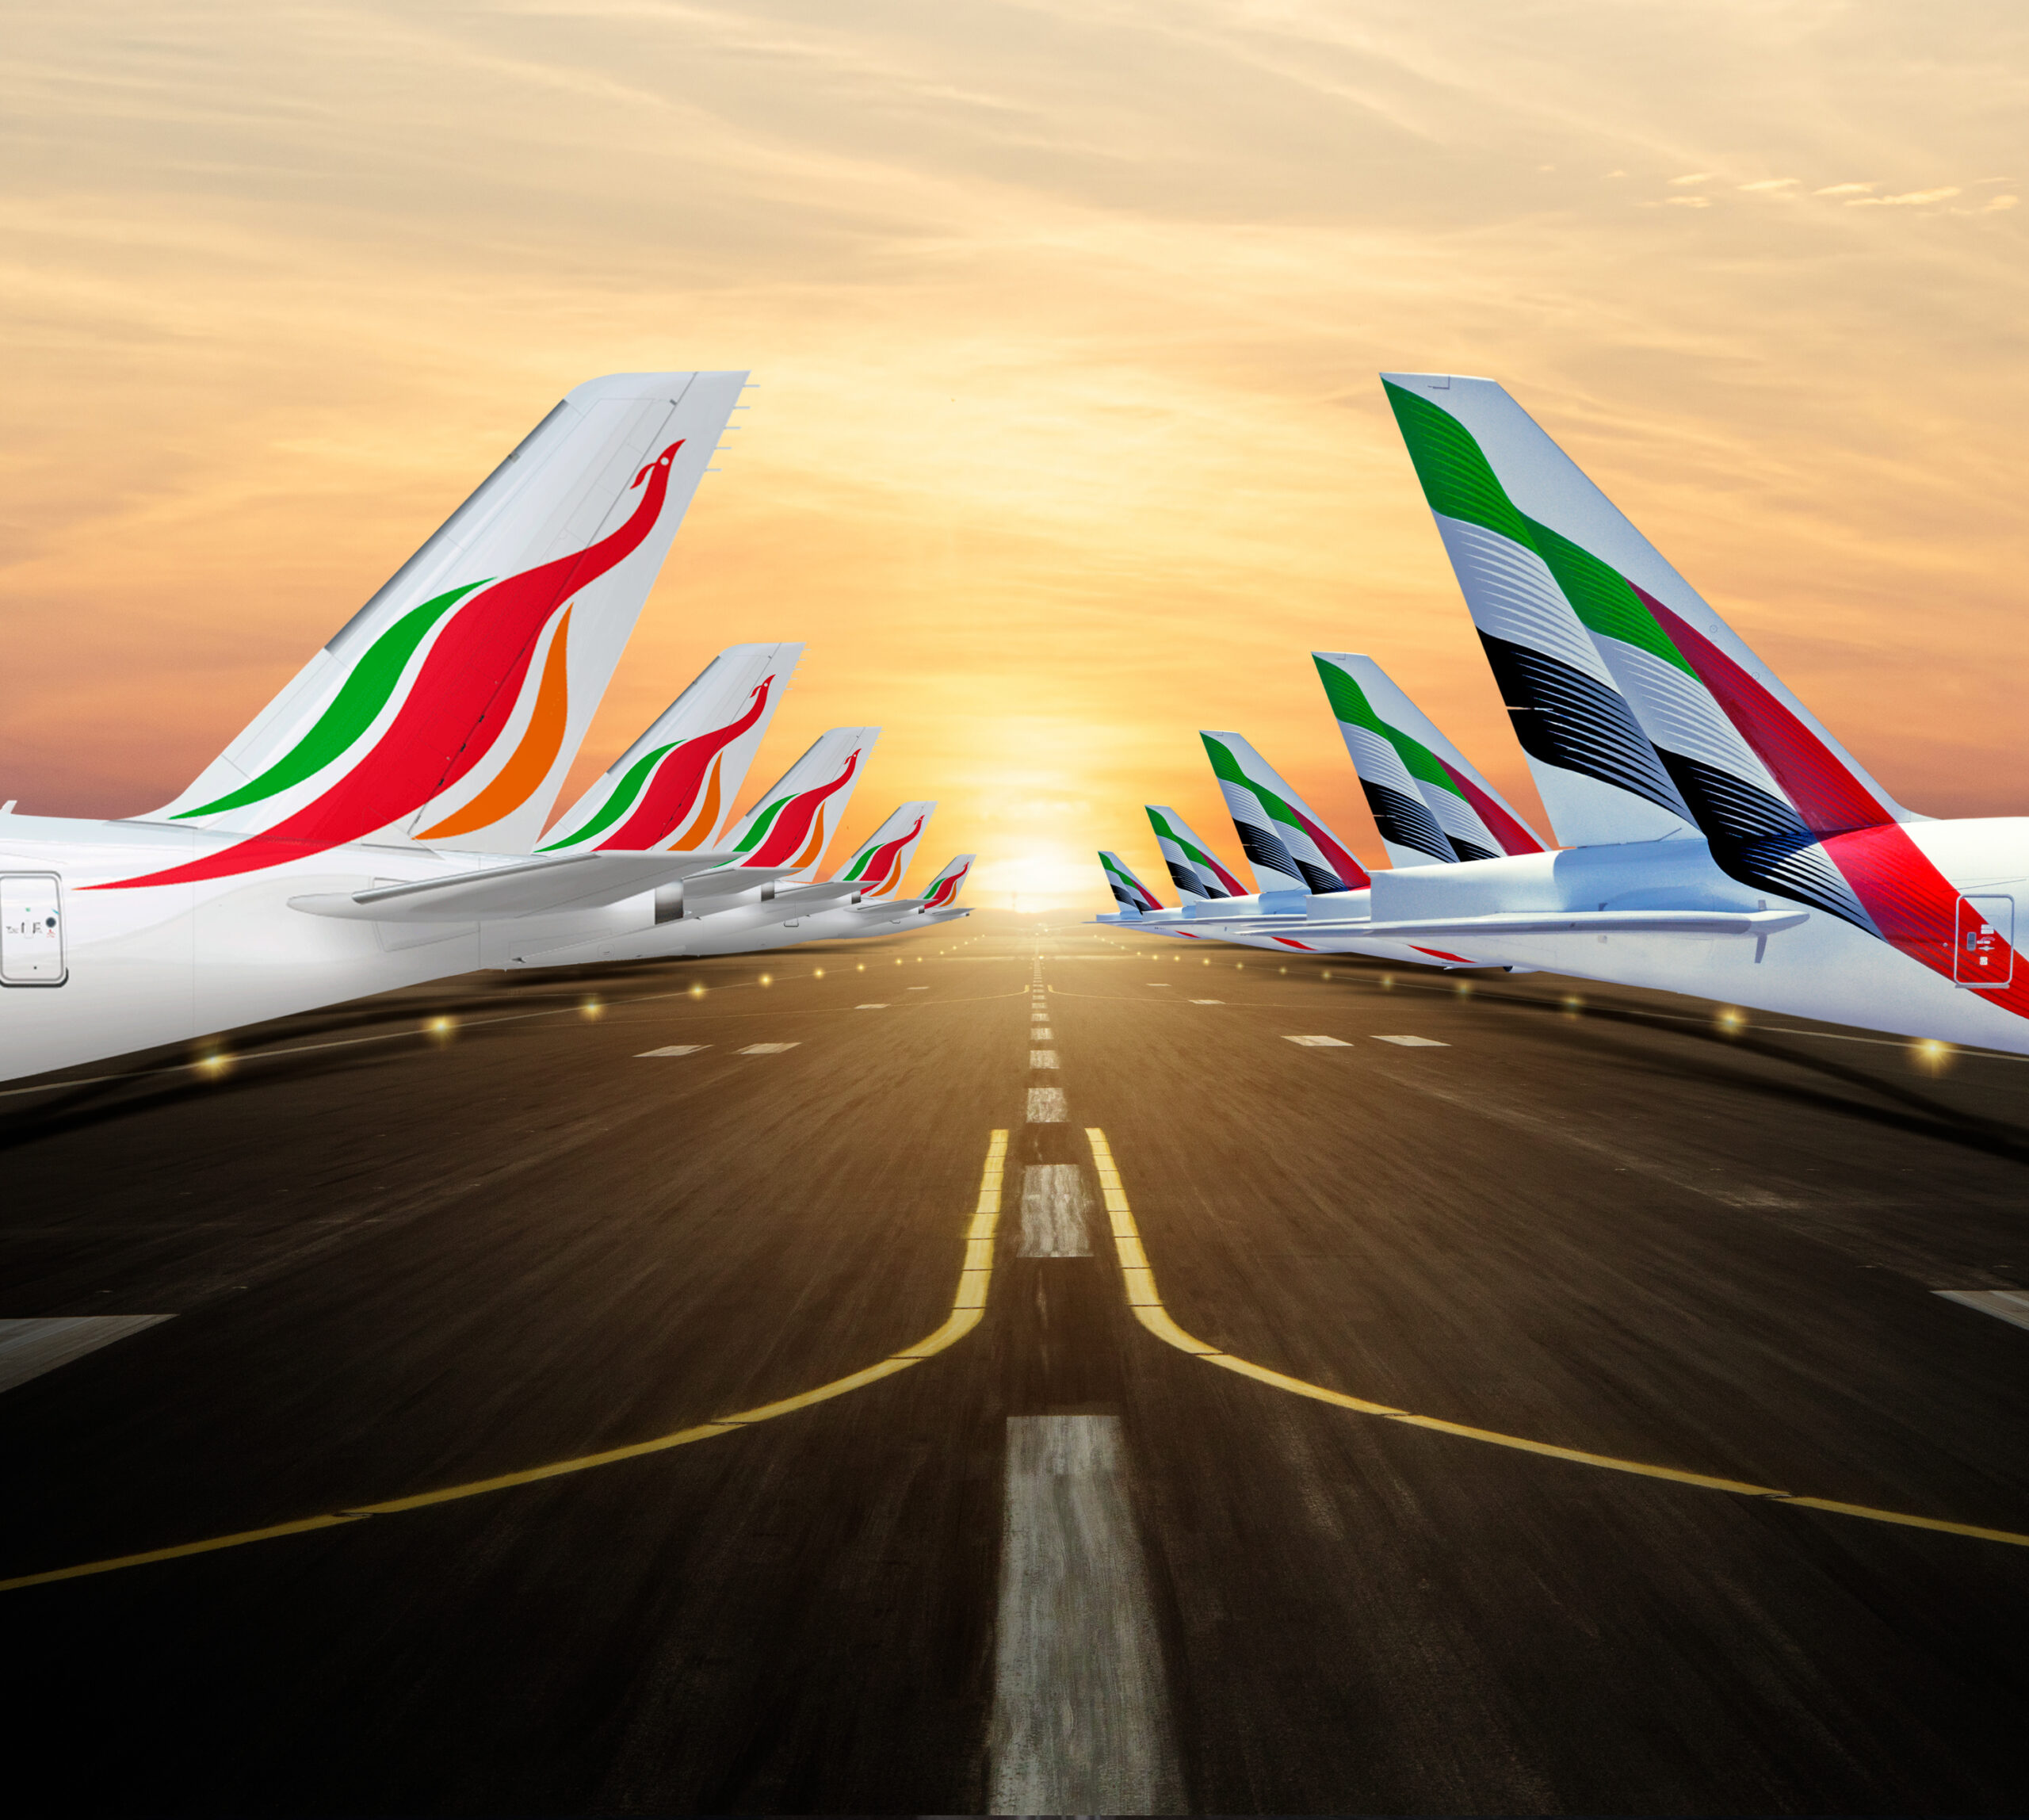 Emirates and United expand codeshare partnership to include flights to and  from Mexico